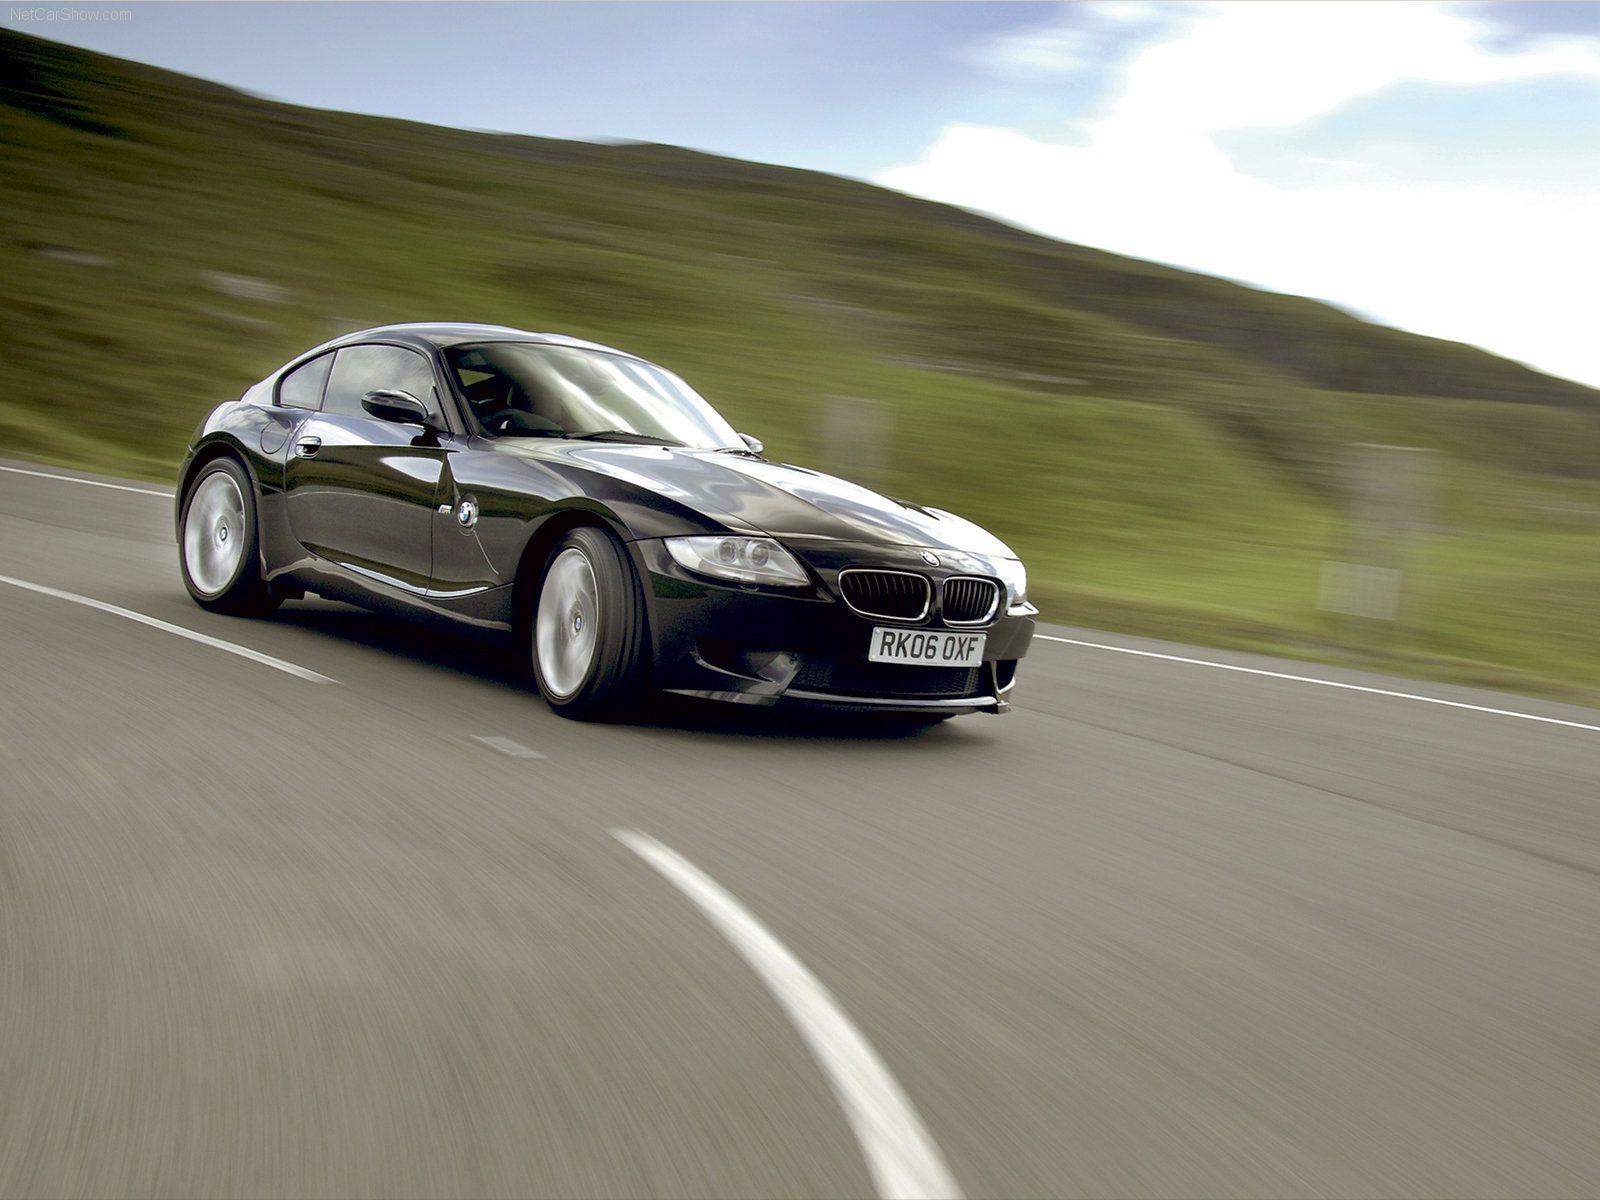 BMW Z4 M Coupe picture # 37030. BMW photo gallery